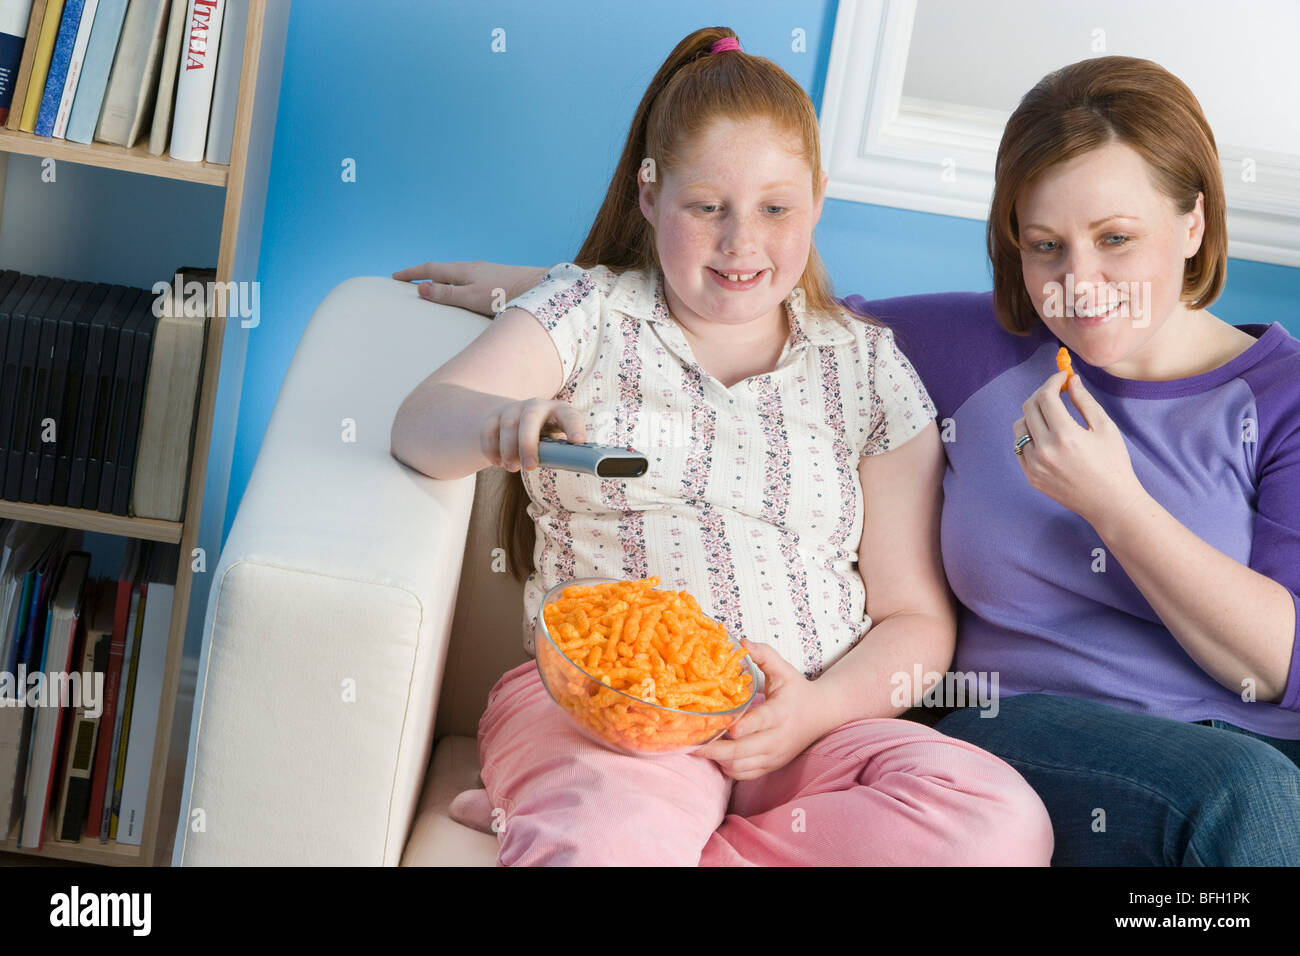 Overweight girl and mother watching television on sofa Stock Photo